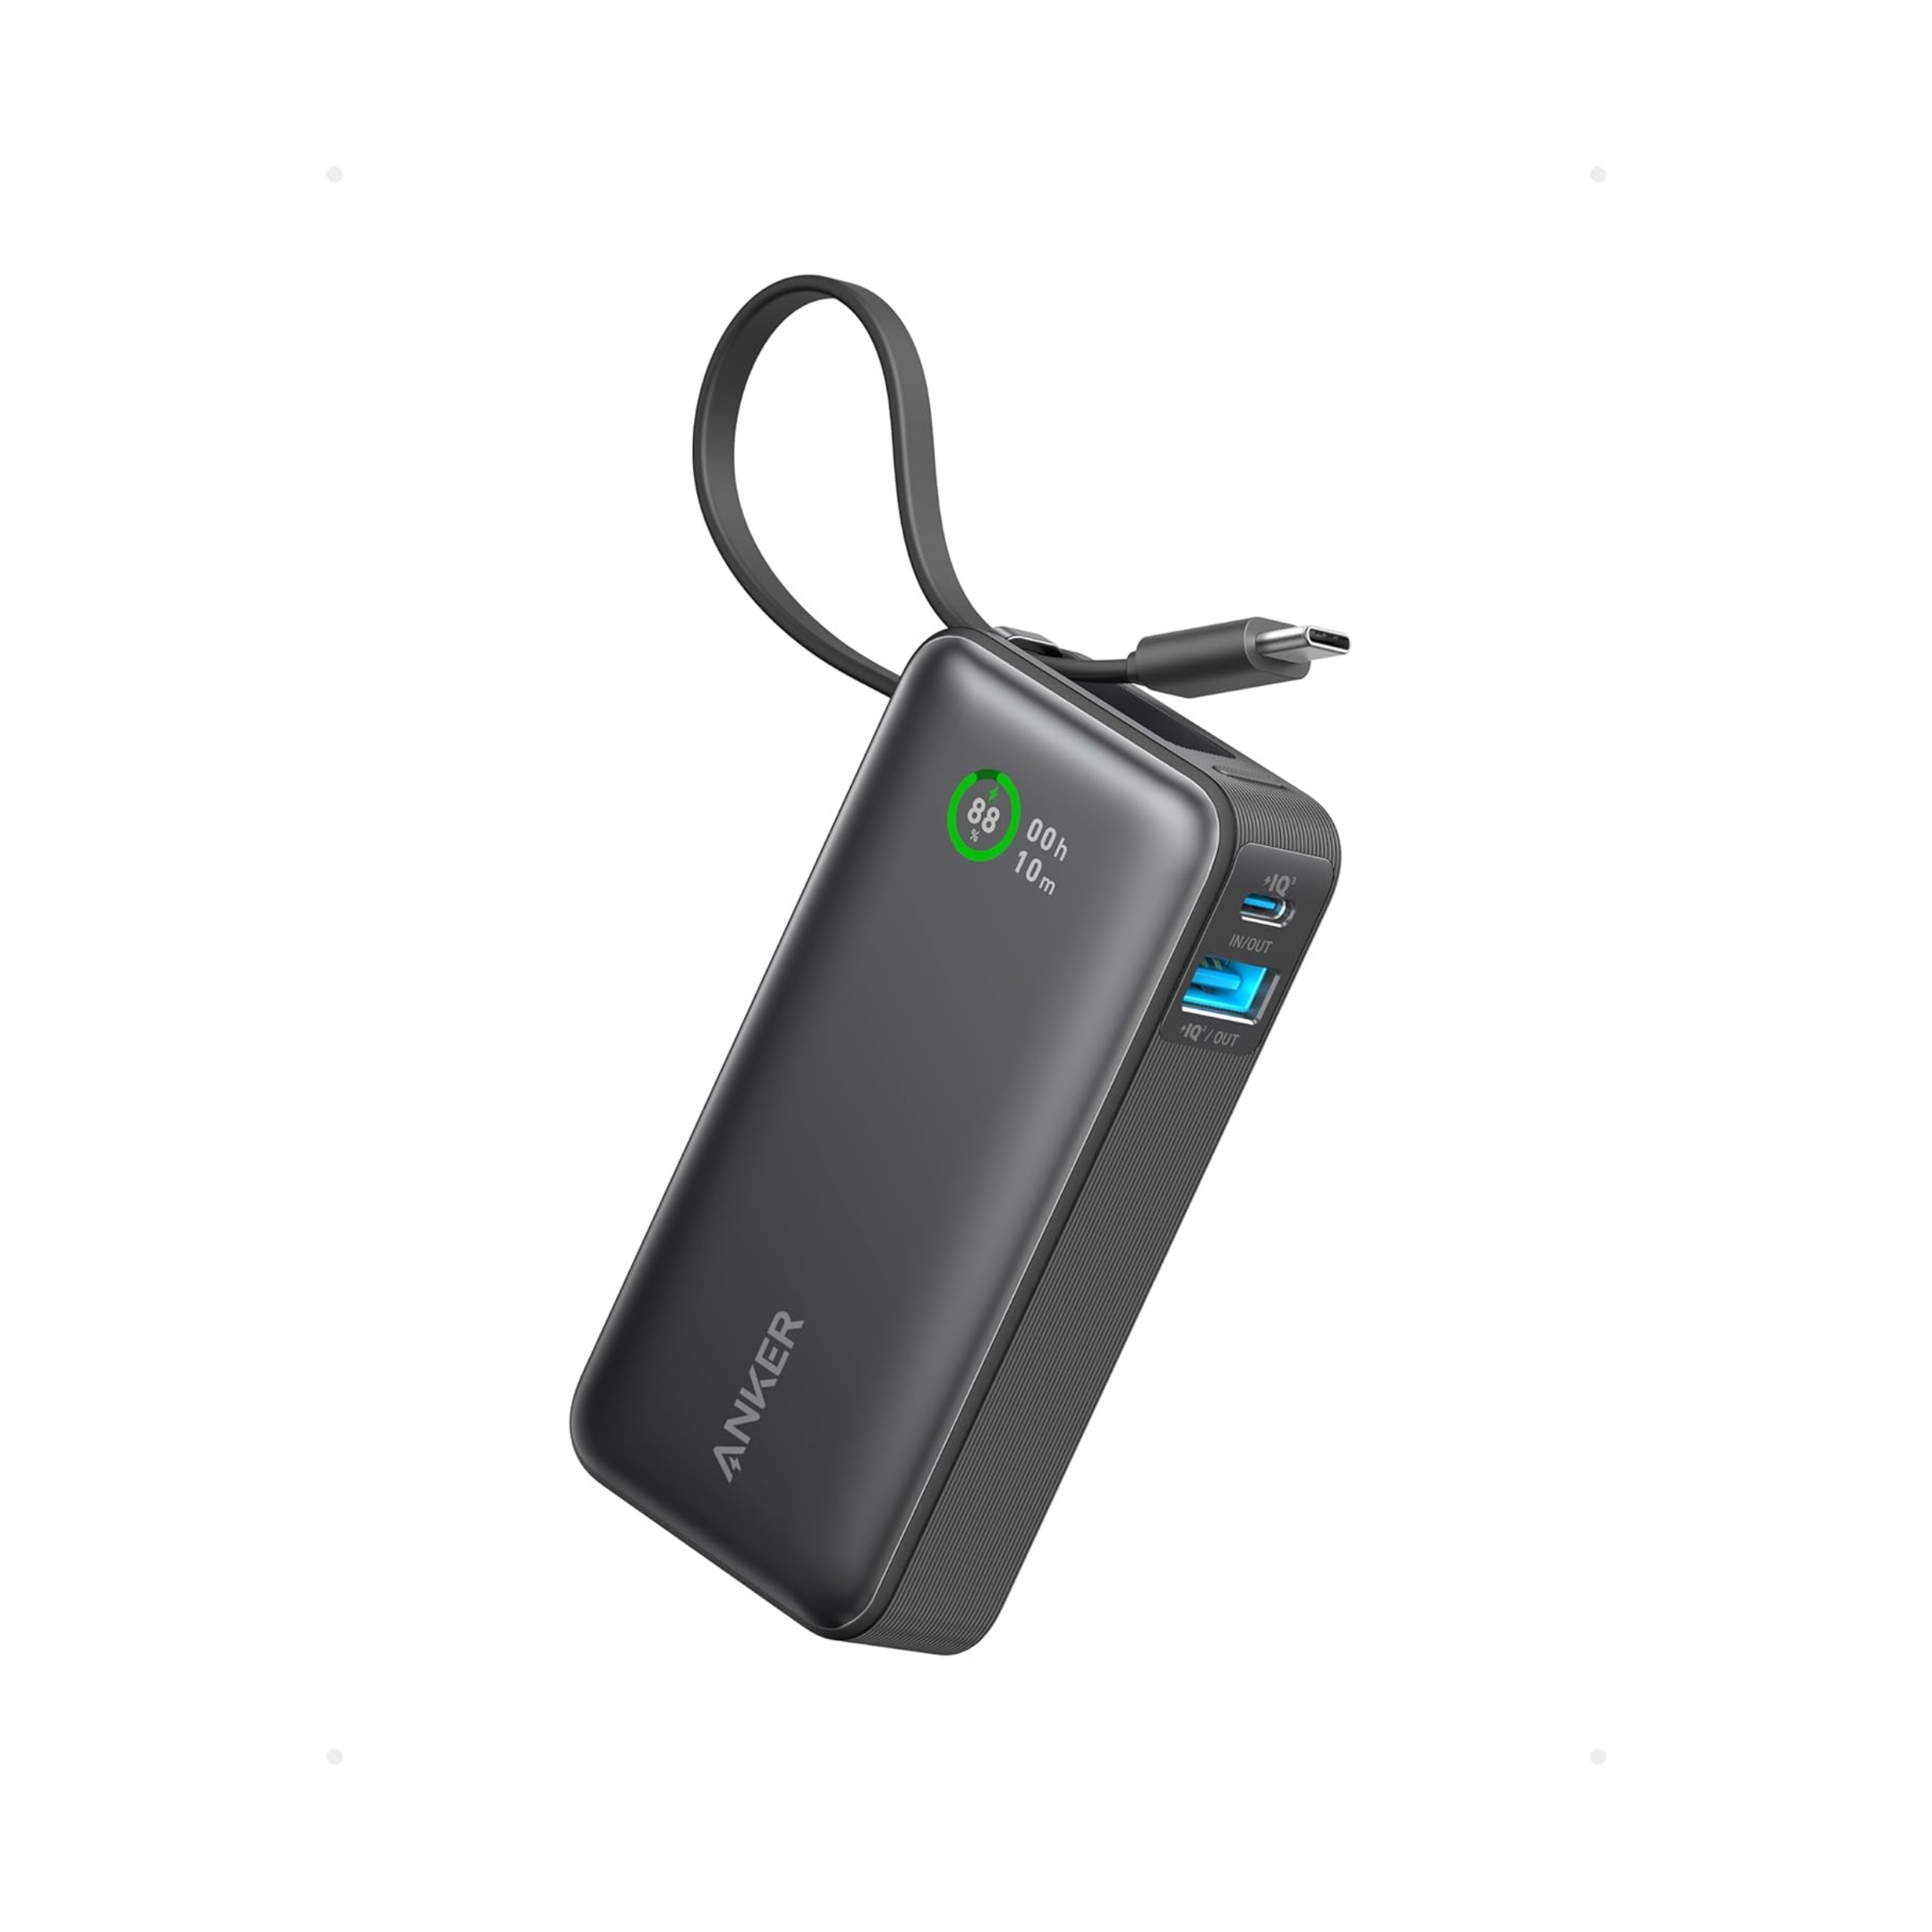 Anker Nano Power Bank (30W, Built-In USB-C Cable) – A1259